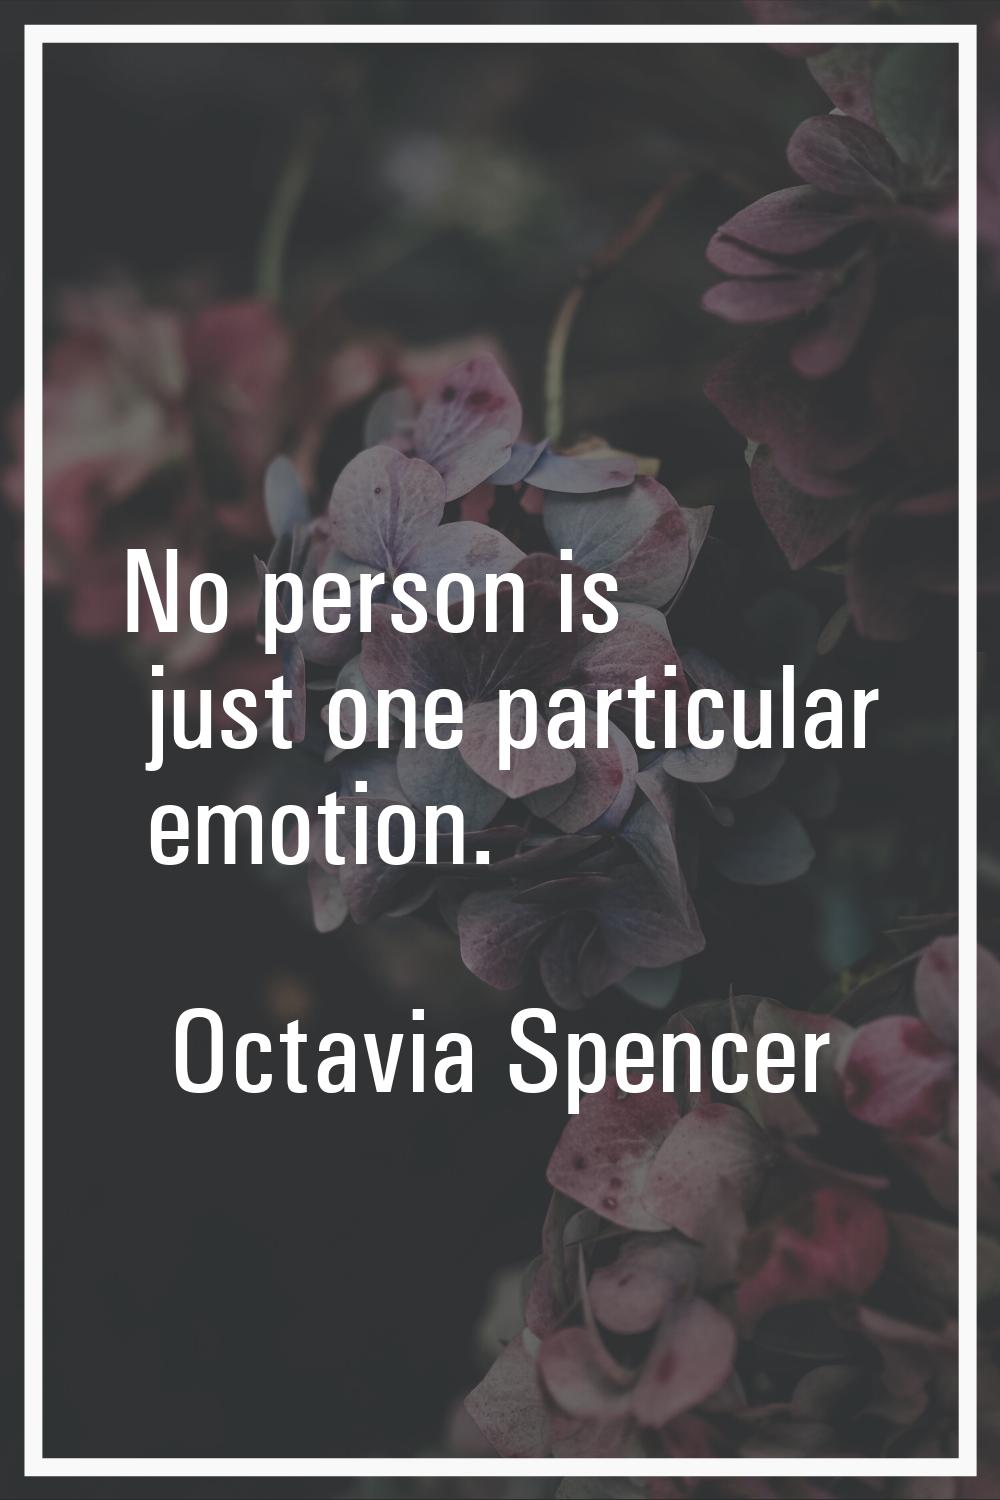 No person is just one particular emotion.